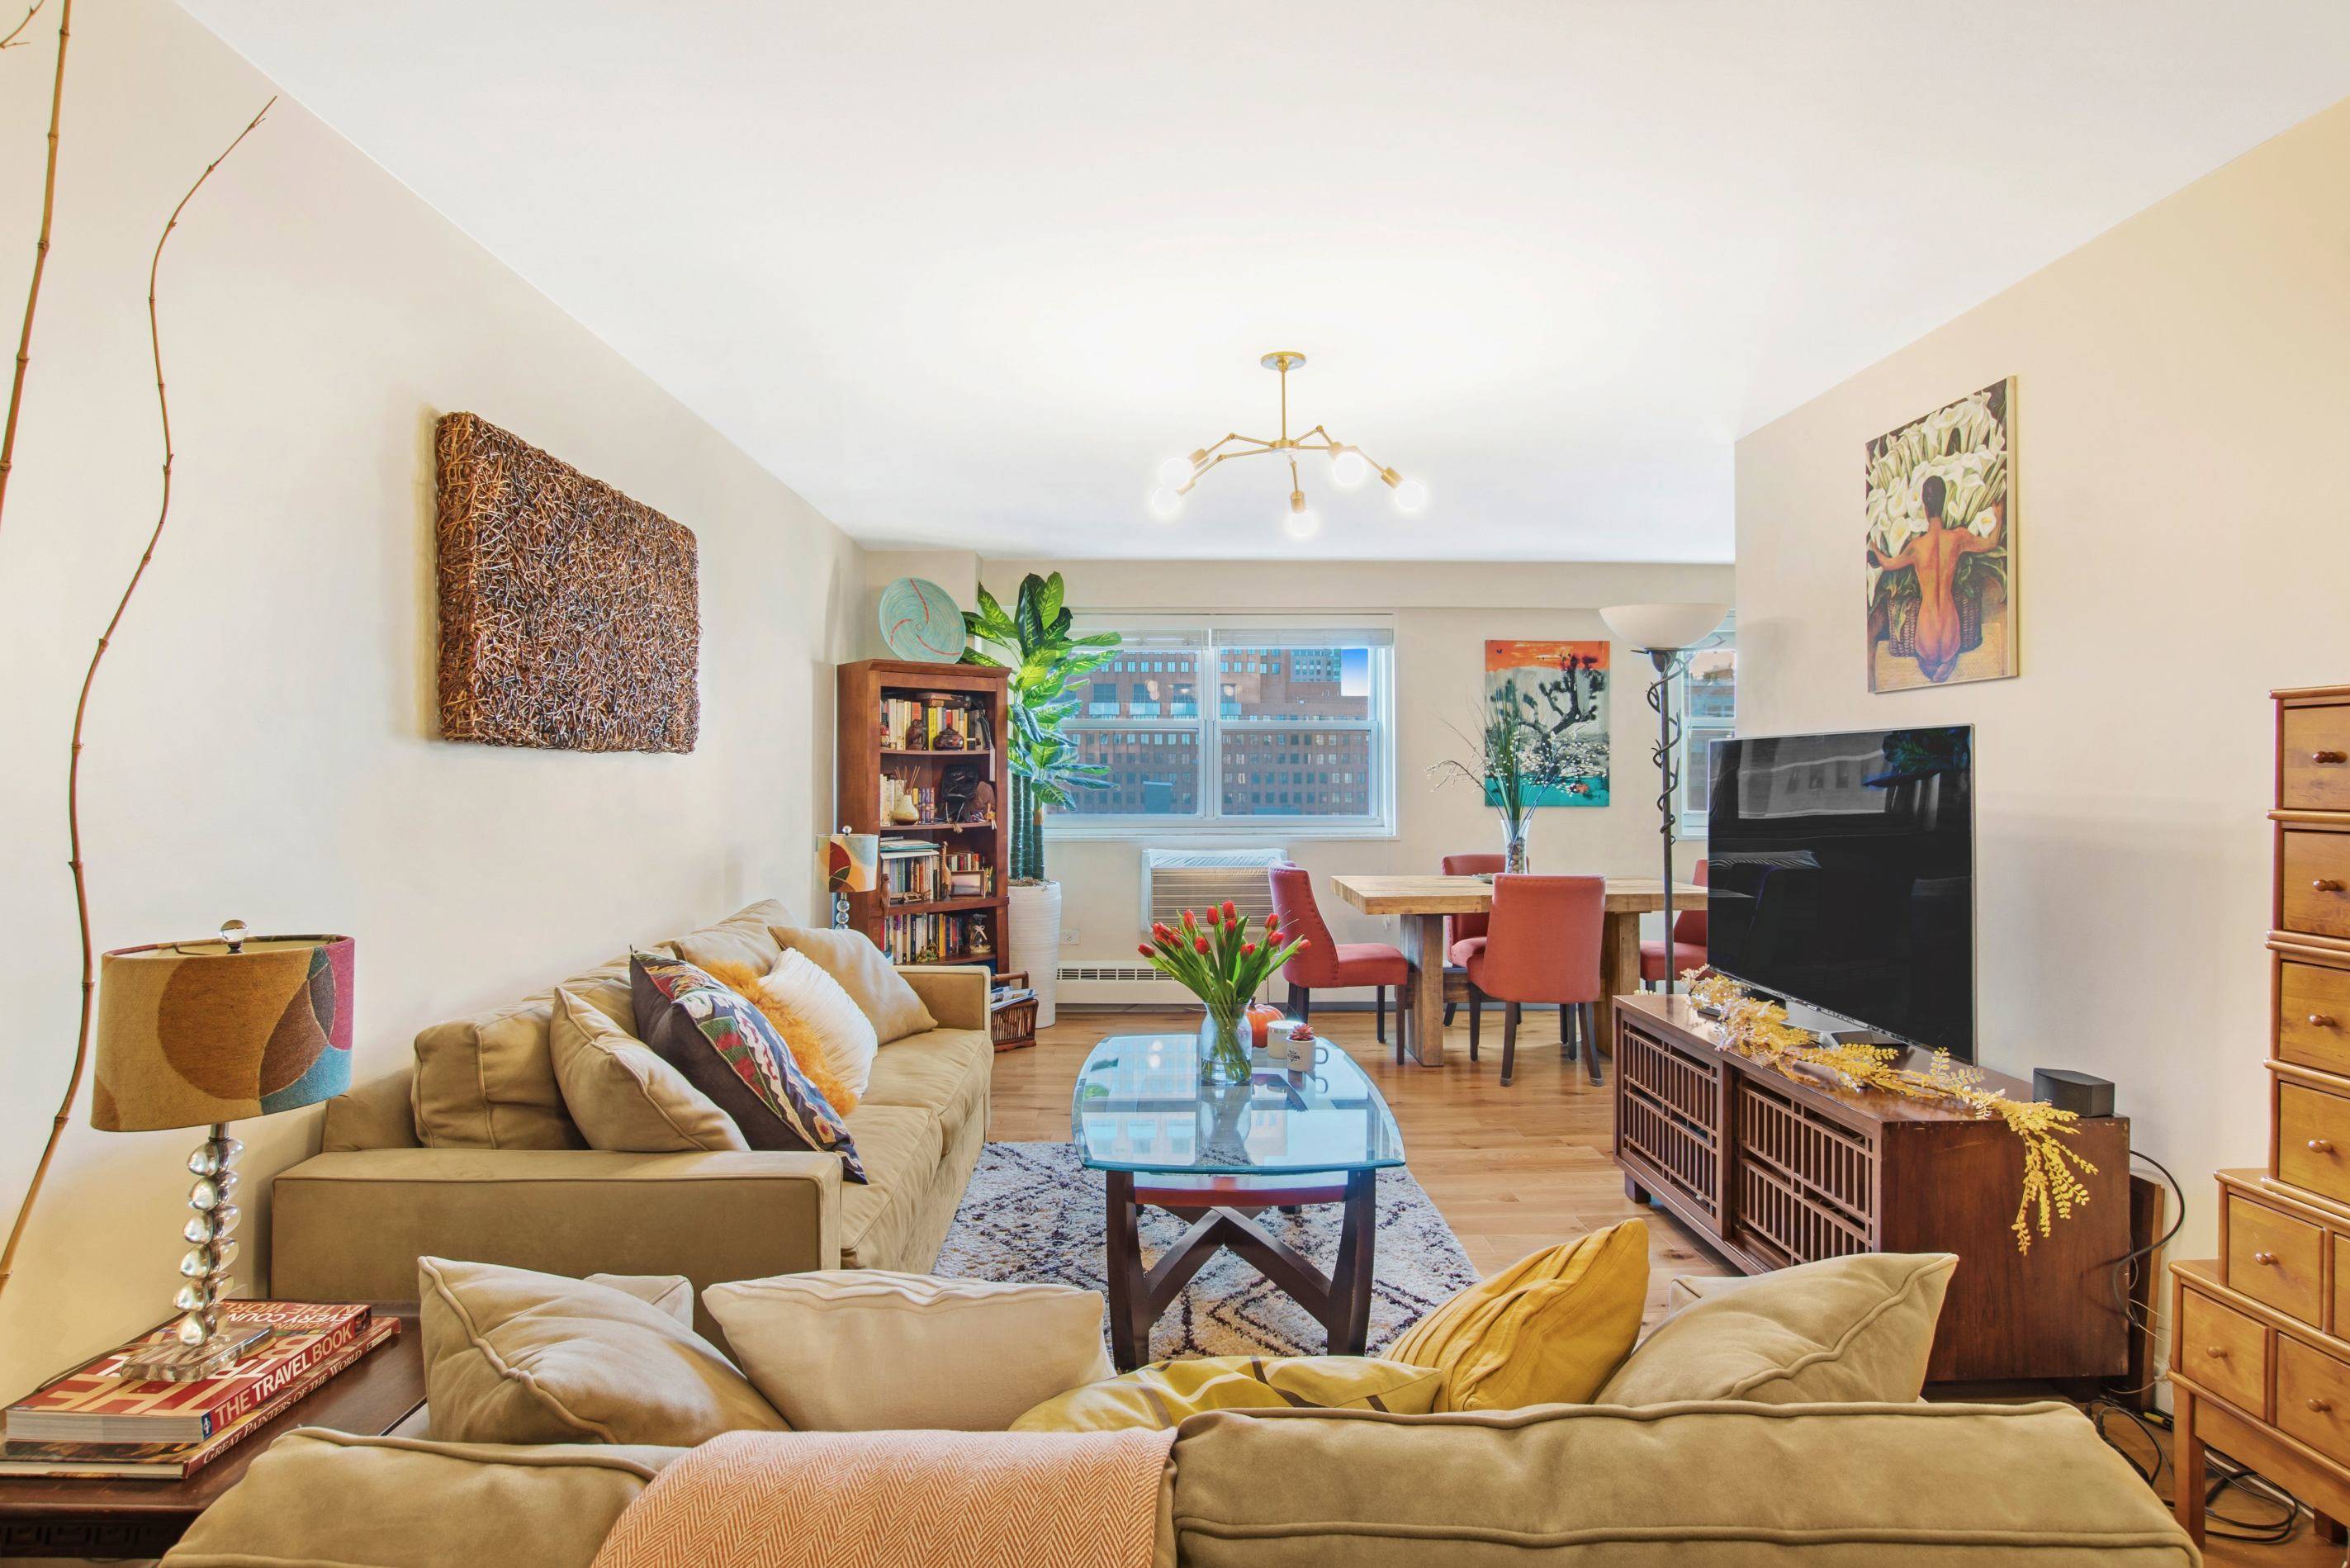 This sunny and super spacious corner one bedroom apartment is located in the desirable neighborhood where Downtown Brooklyn meets Fort Greene.